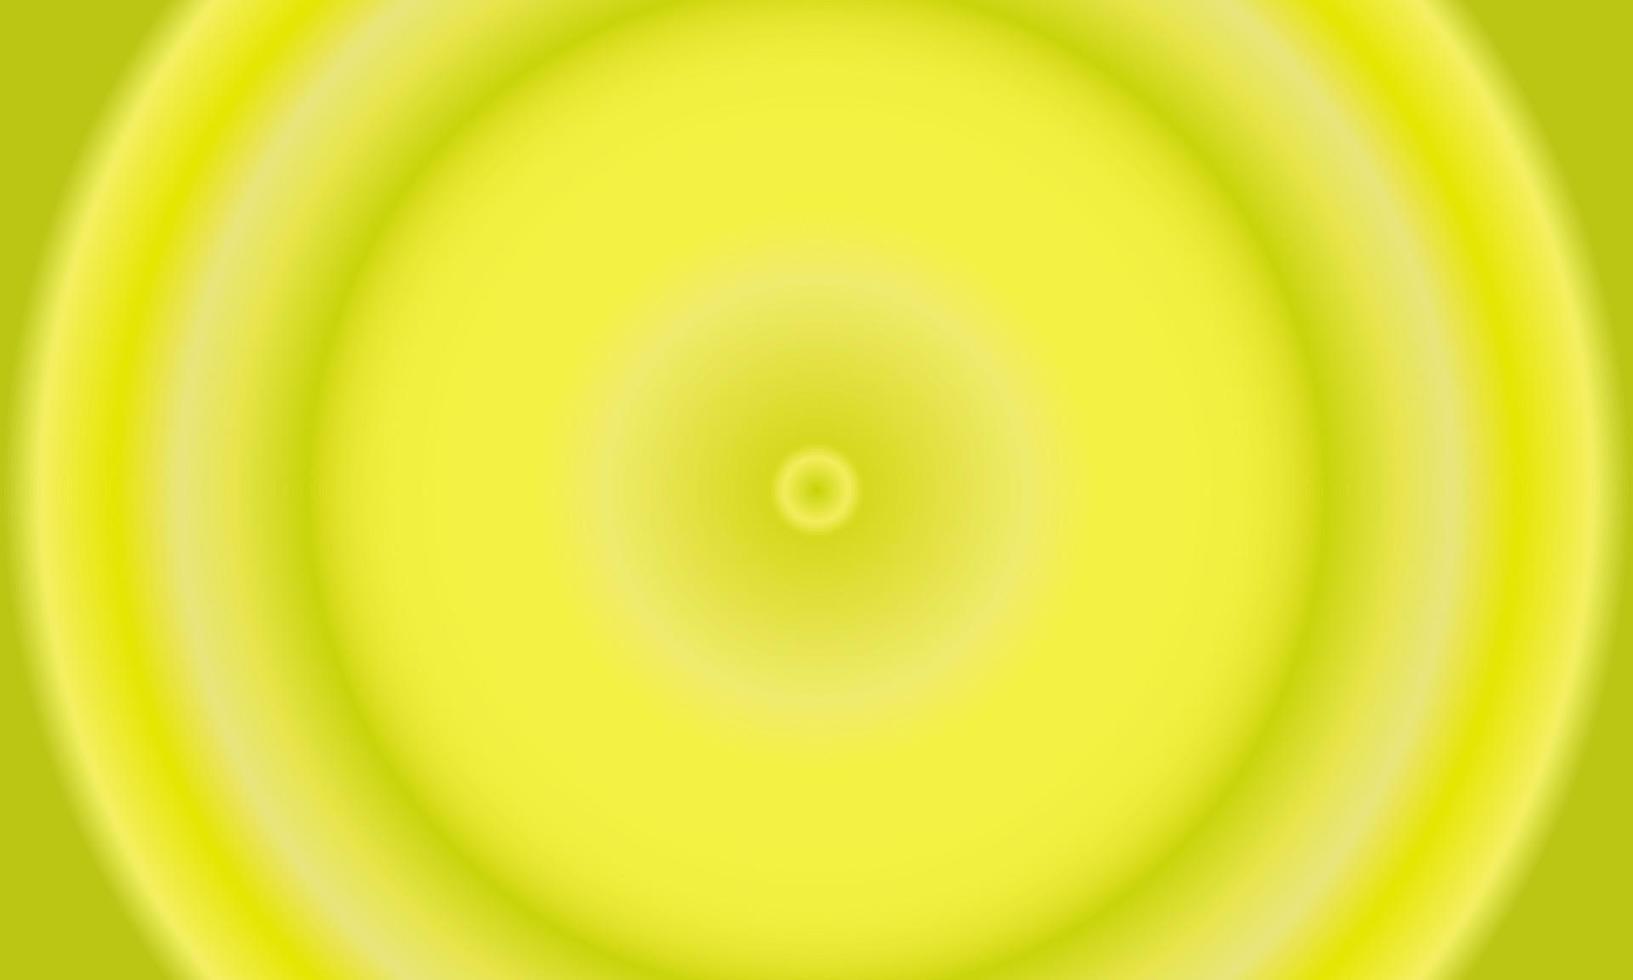 yellow circle radial gradient abstract background. simple, blur, shiny, modern and colorful style. use for homepage, backgdrop, wallpaper, card, cover, poster, banner or flyer vector